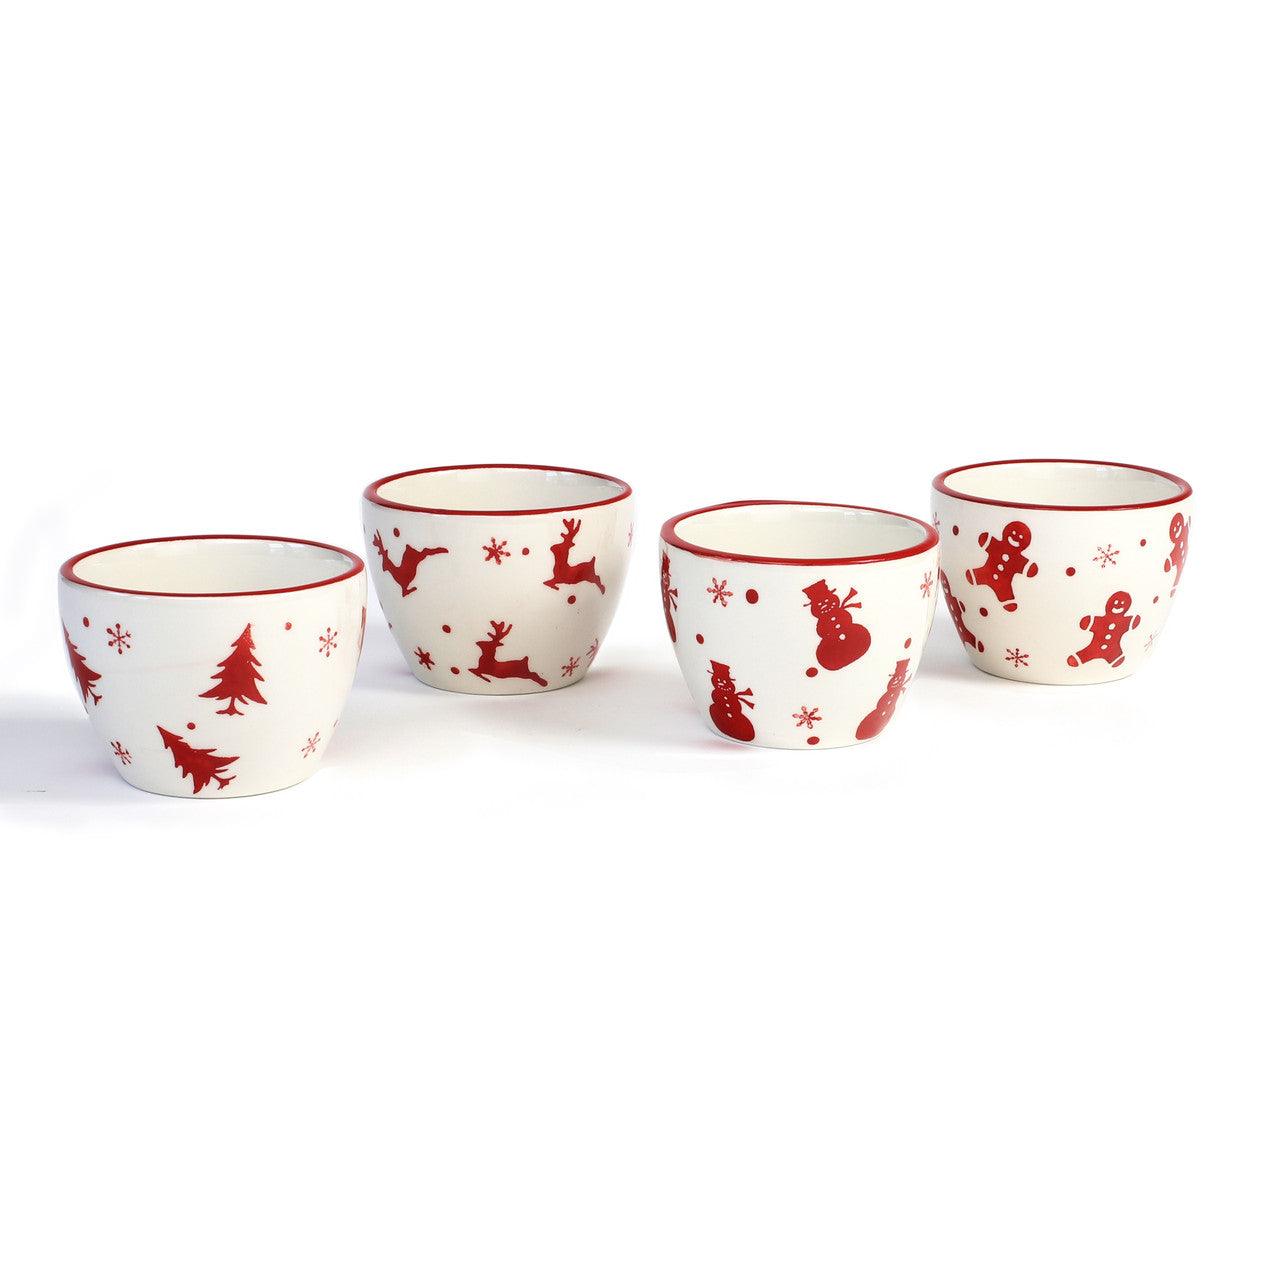 Winterfest Dipping Bowls, Set of 4 - Euro Ceramica 